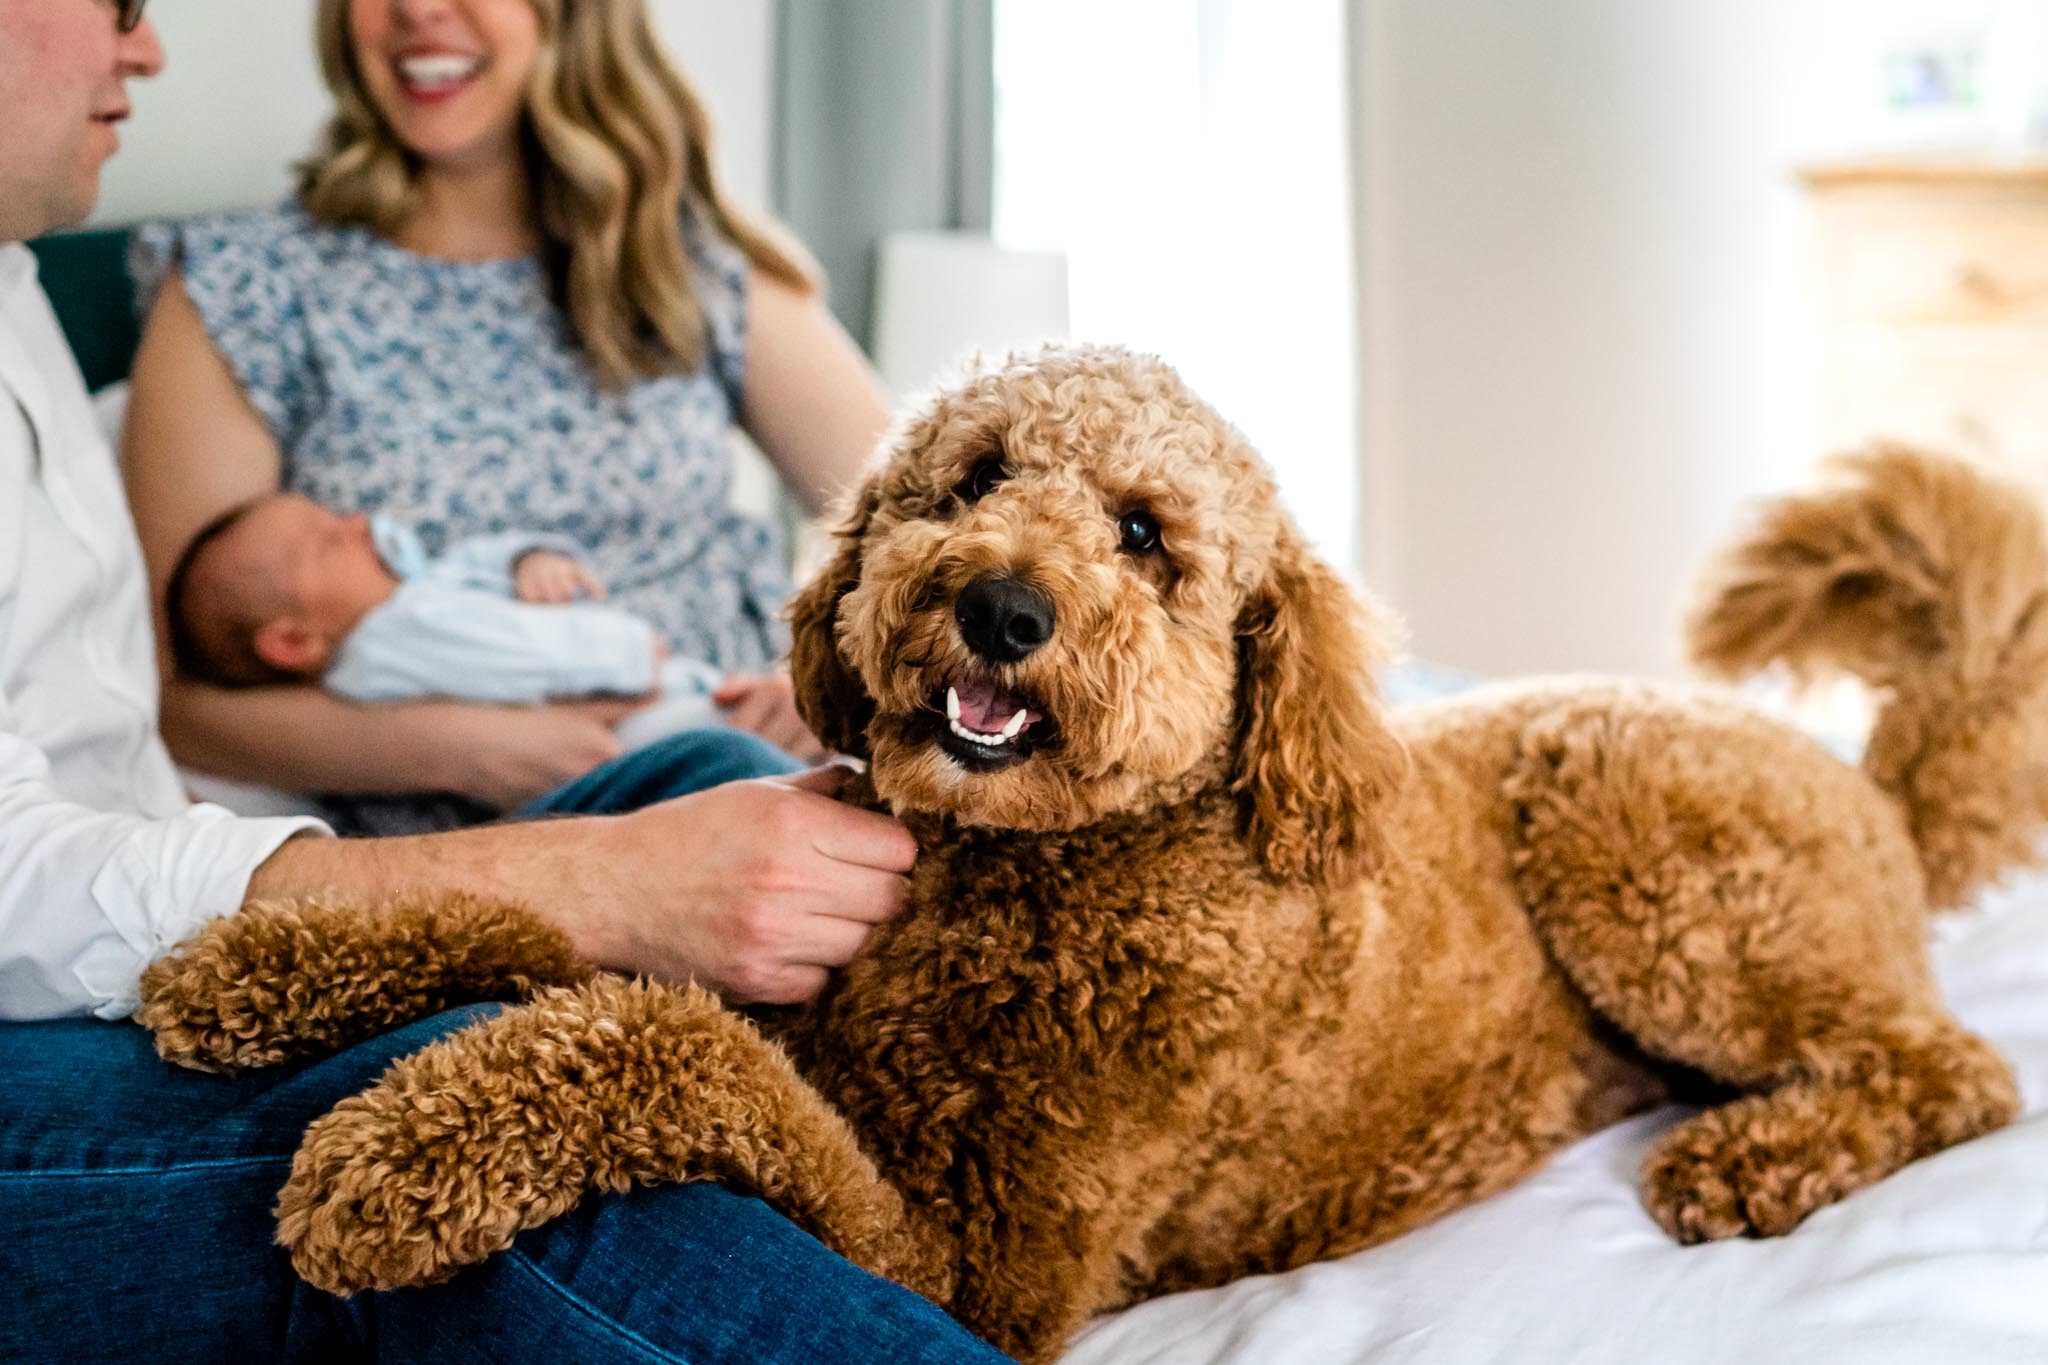 Goldendoodle sitting on bed | Greensboro Newborn Photographer | By G. Lin Photography